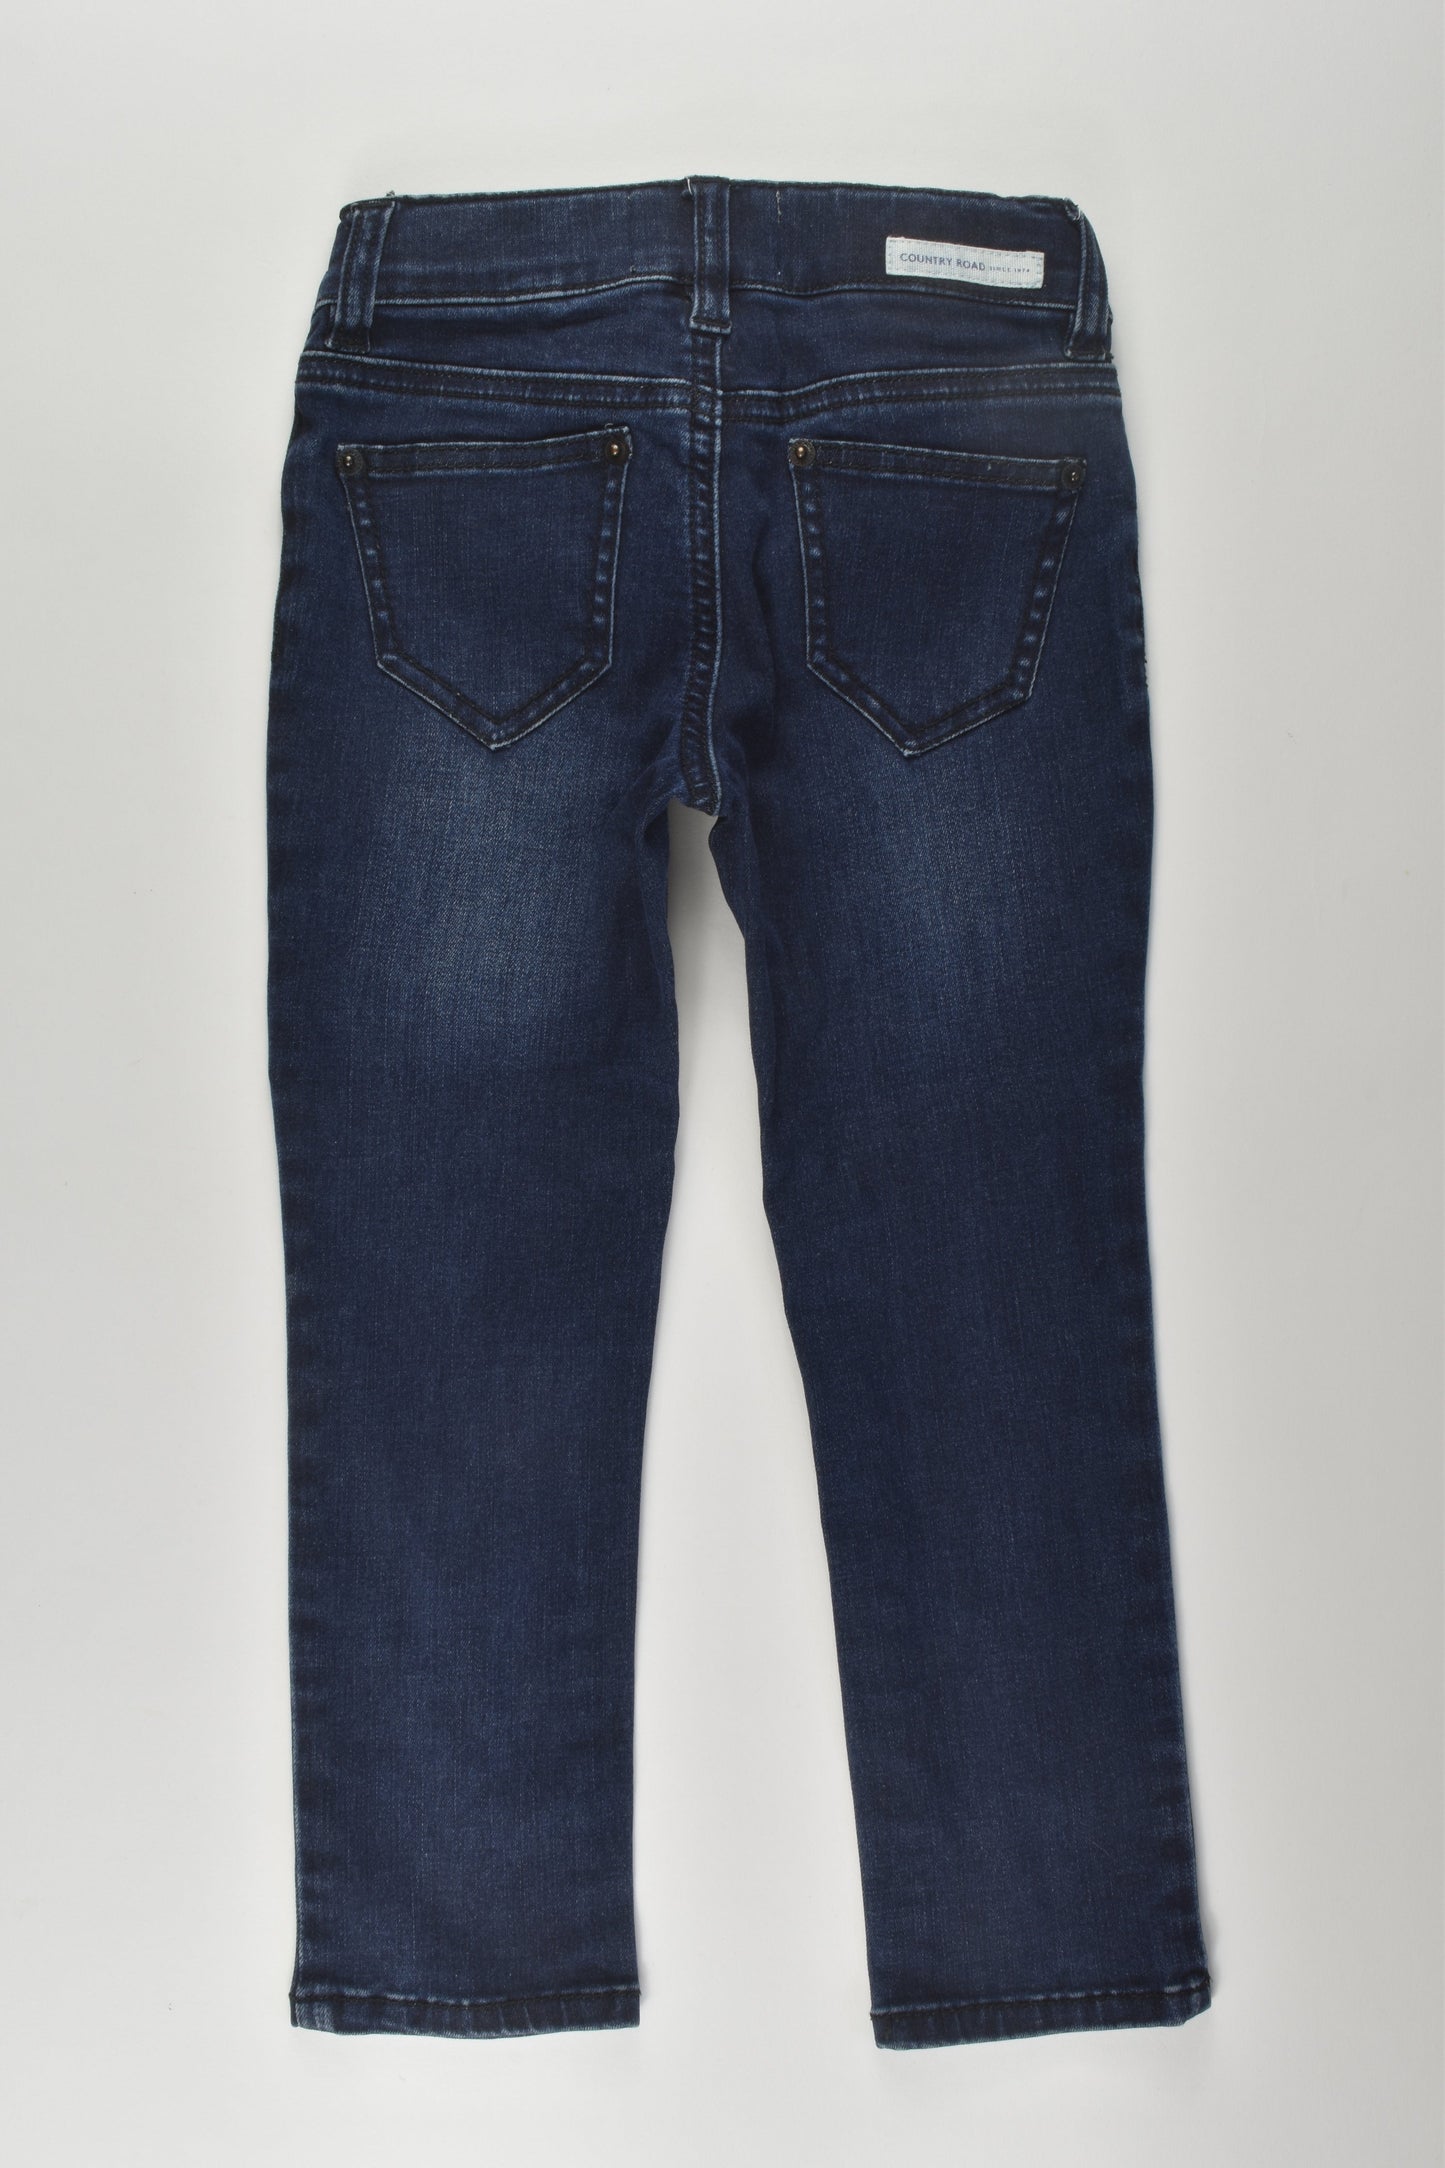 Country Road Size 3 Denim Pants